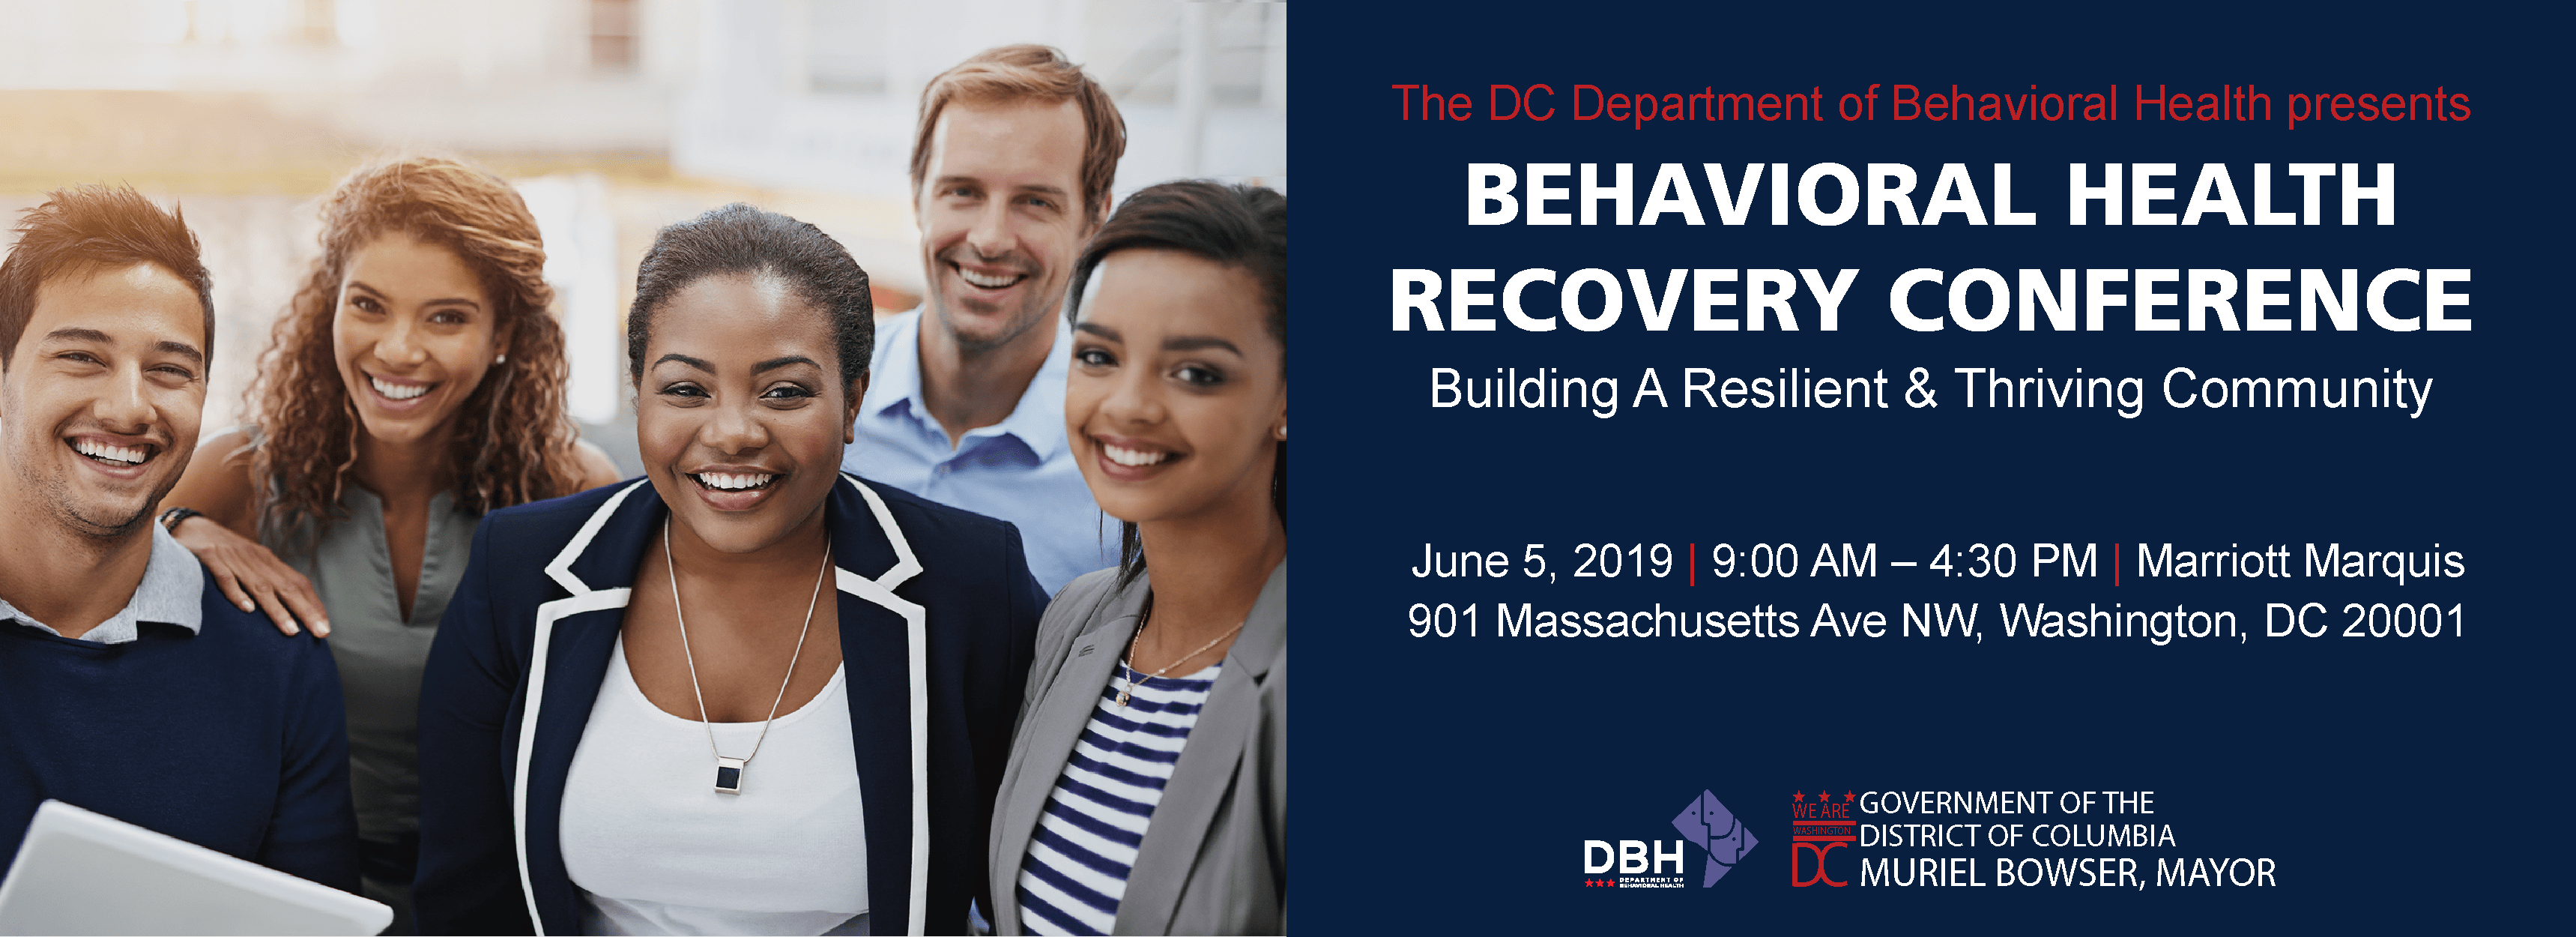 The Department of Behavioral Health provides prevention, intervention and treatment services and supports for children, youth and adults with mental and/or substance use disorders including emergency psychiatric care and community-based outpatient and residential services.